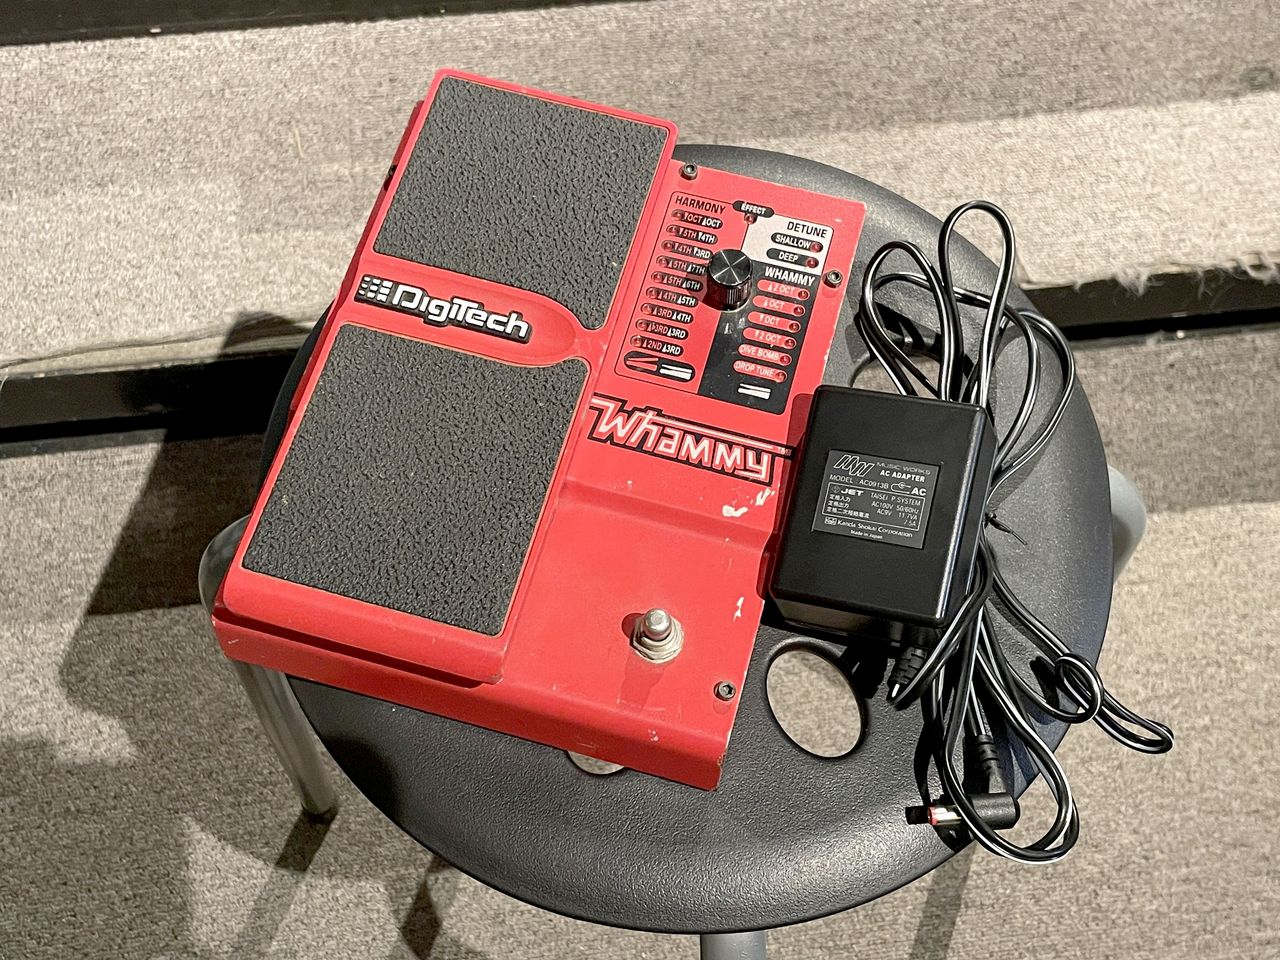 DigiTech】 WHAMMY 4 【ワーミーペダル】 - www.complementogifts.com.br